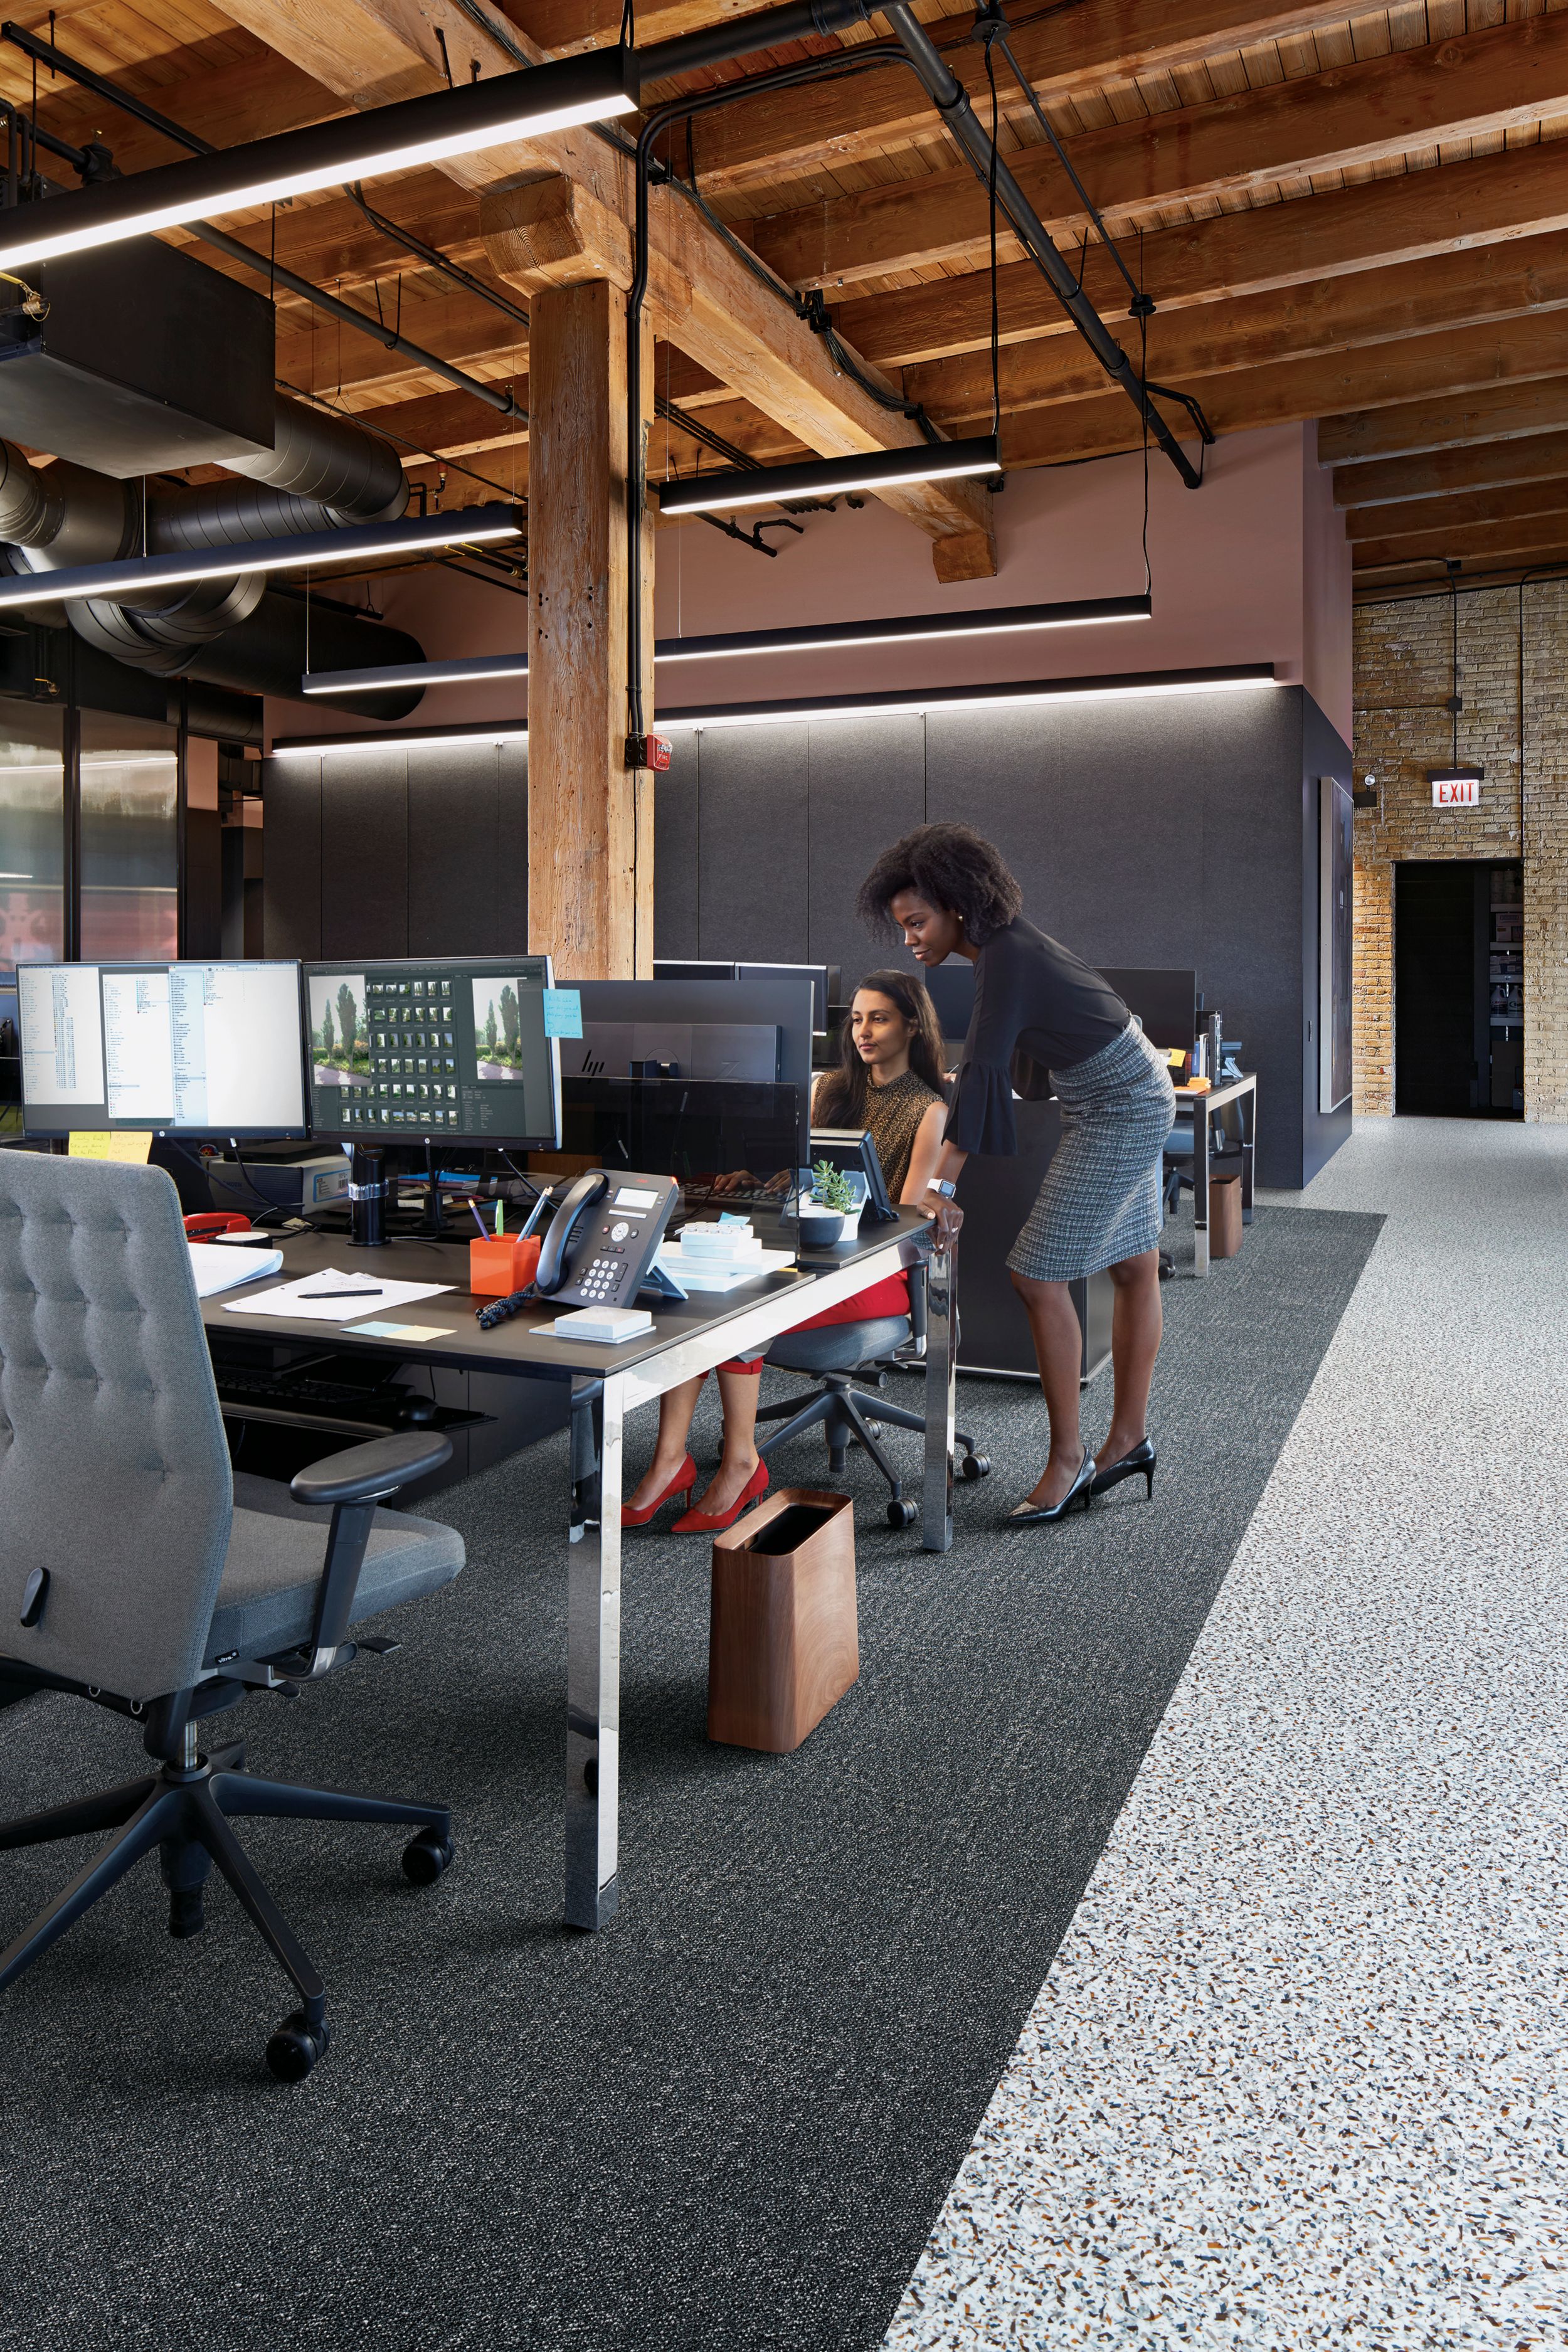 image Interface Step it Up and Walk on By carpet tile in common work space with two people numéro 4